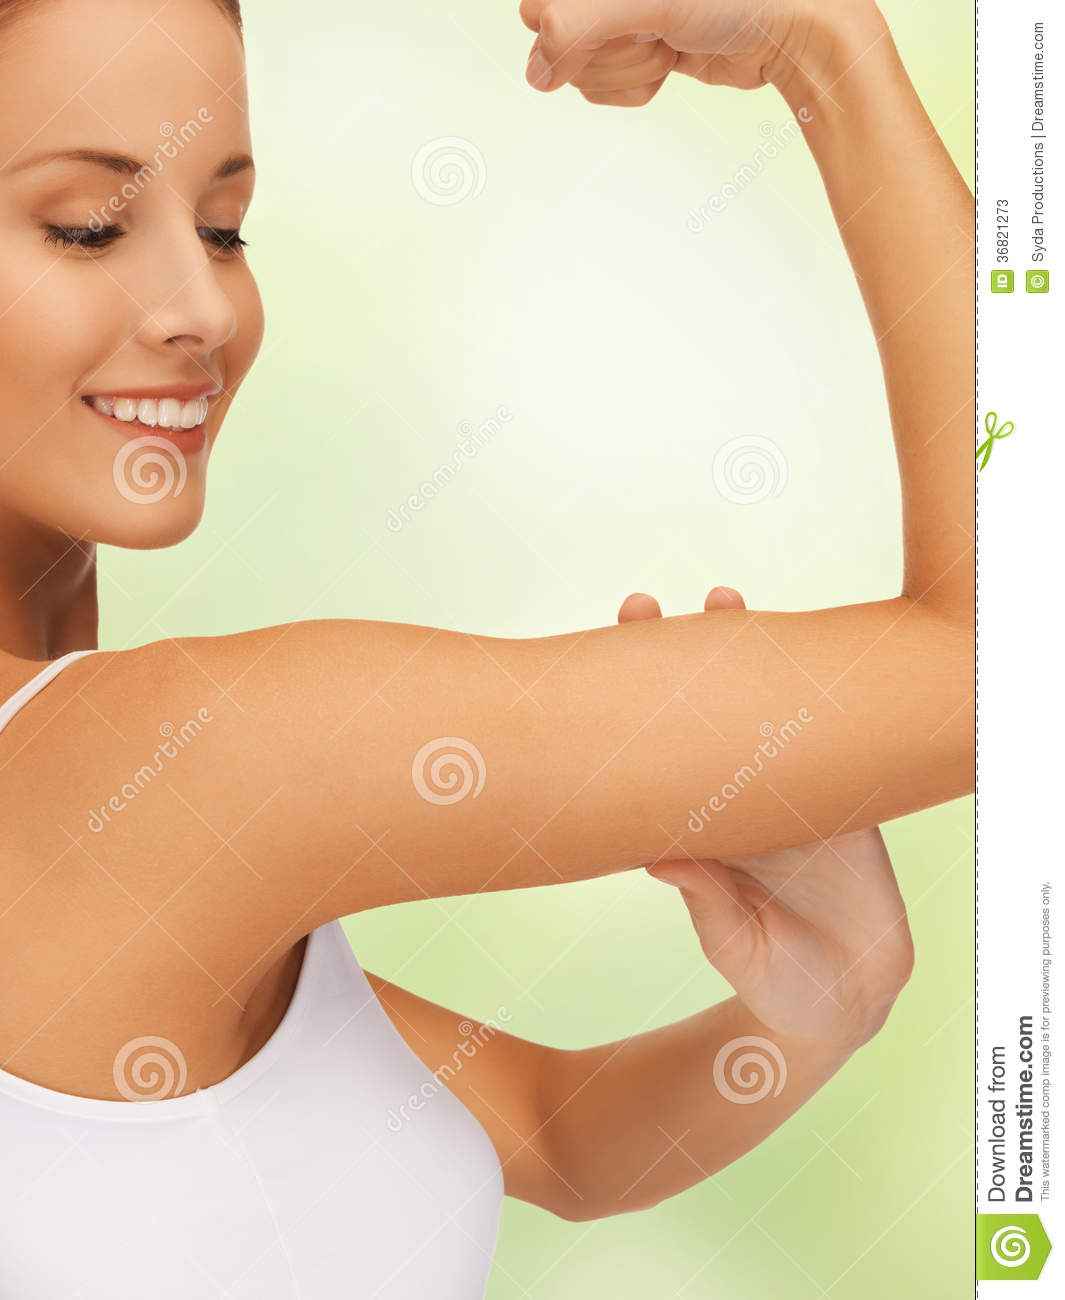 Sporty Woman Flexing Her Biceps Stock Photos   Image  36821273